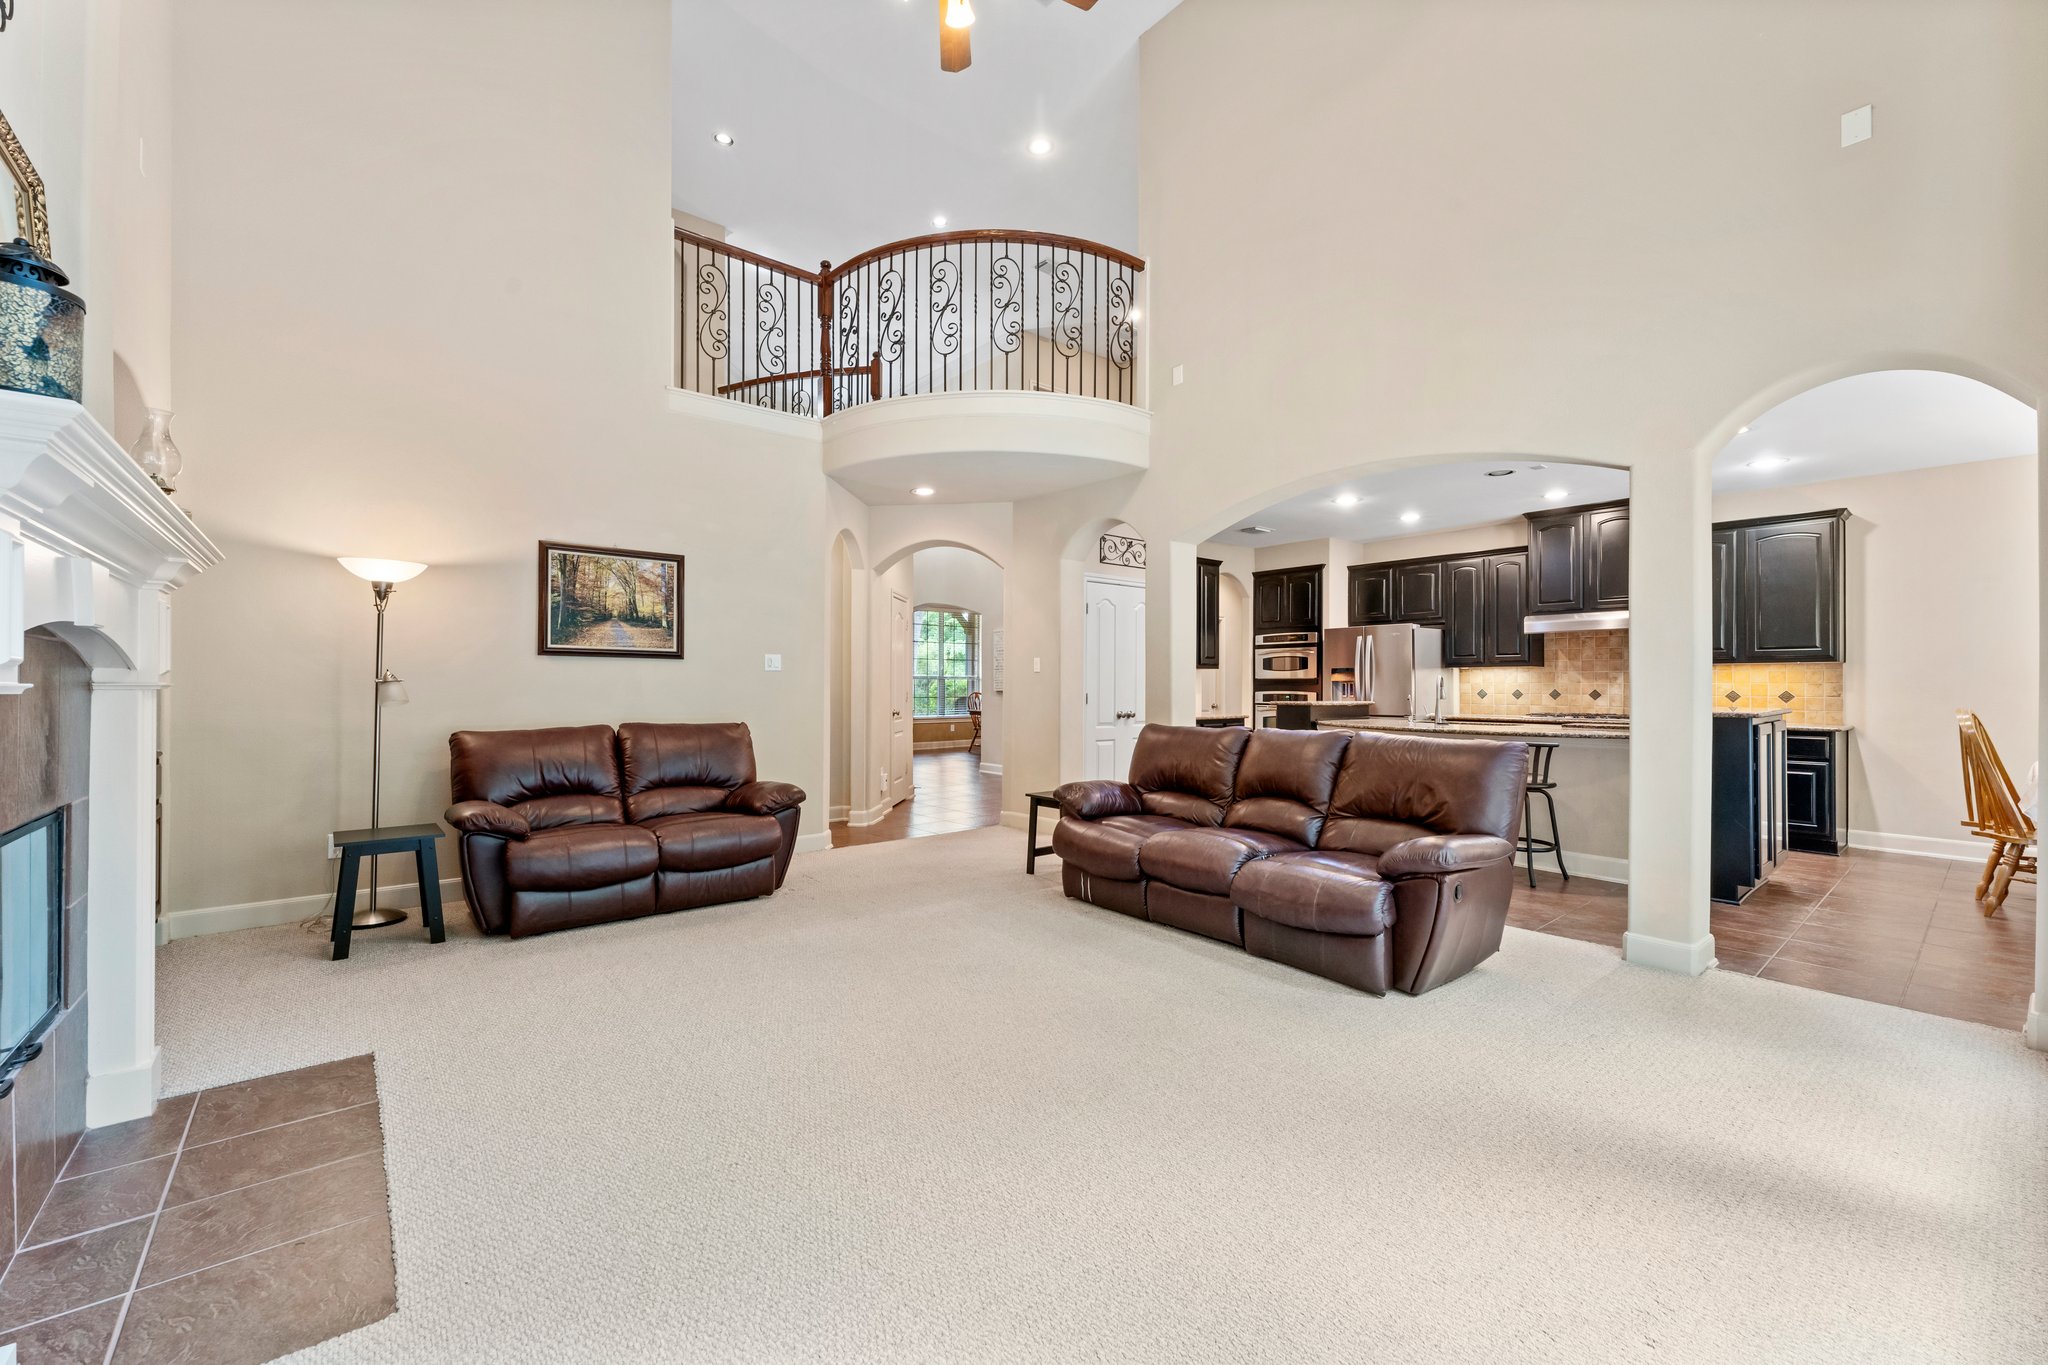 Family room is open to the kitchen and features large decorative arches.